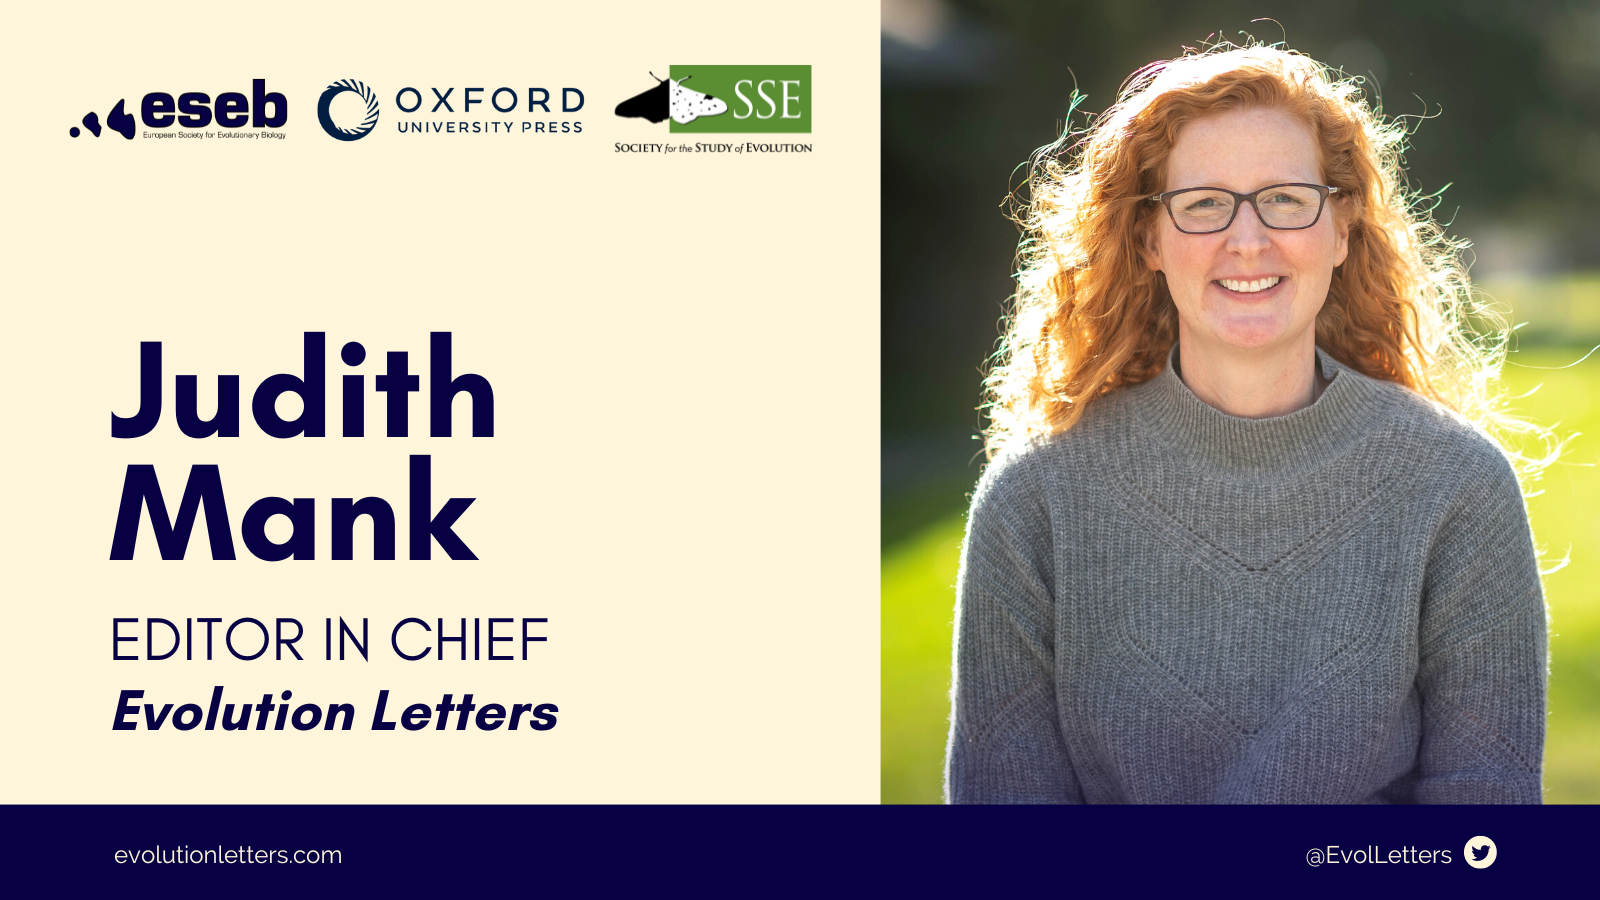 Logos: ESEB, Oxford University Press, and SSE. Text: Judith Mank, Editor in Chief, Evolution Letters. Judith Mank, a woman with long curly red hair and glasses, stands smiling in front of a sunny green background.